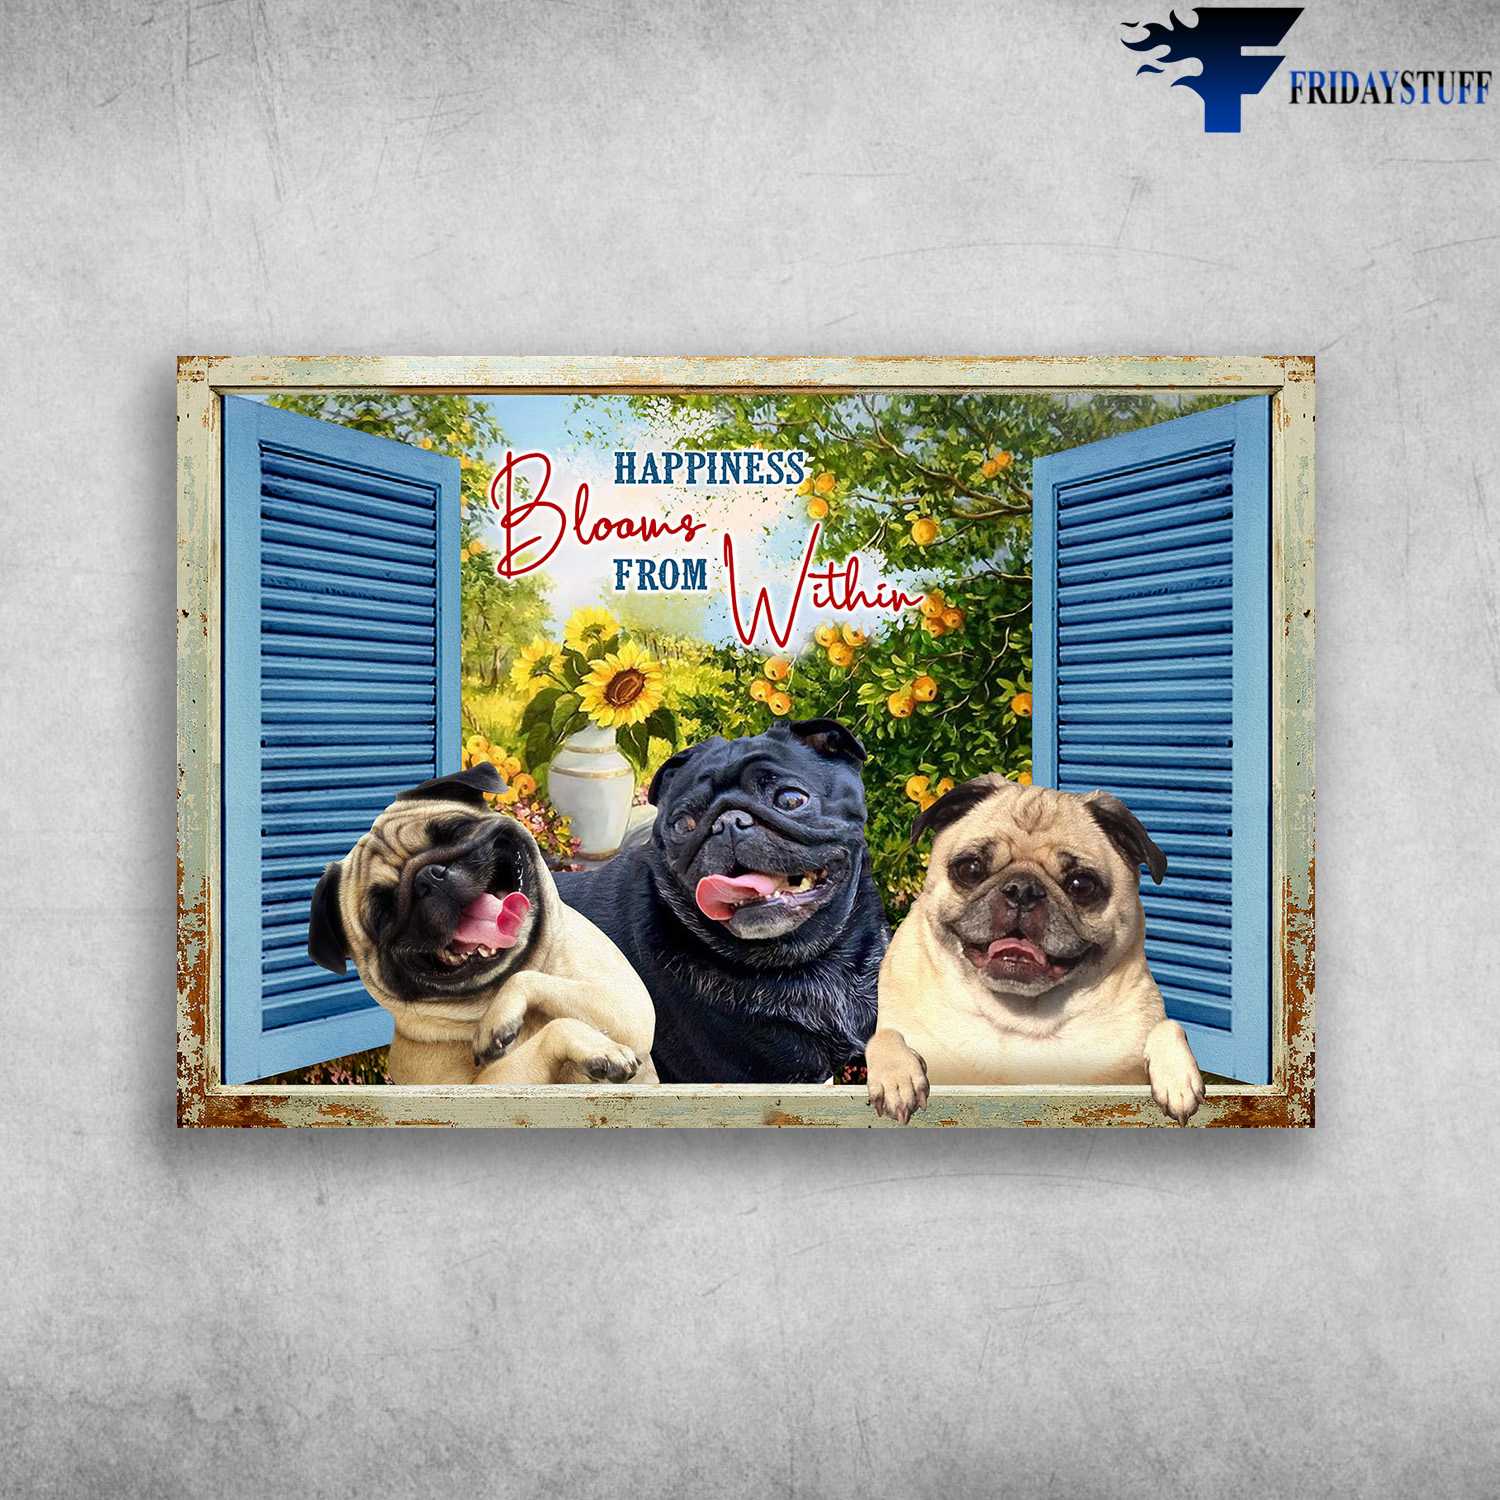 Pug Dog Window -Happiness Blooms From Within, Sunflower Garden